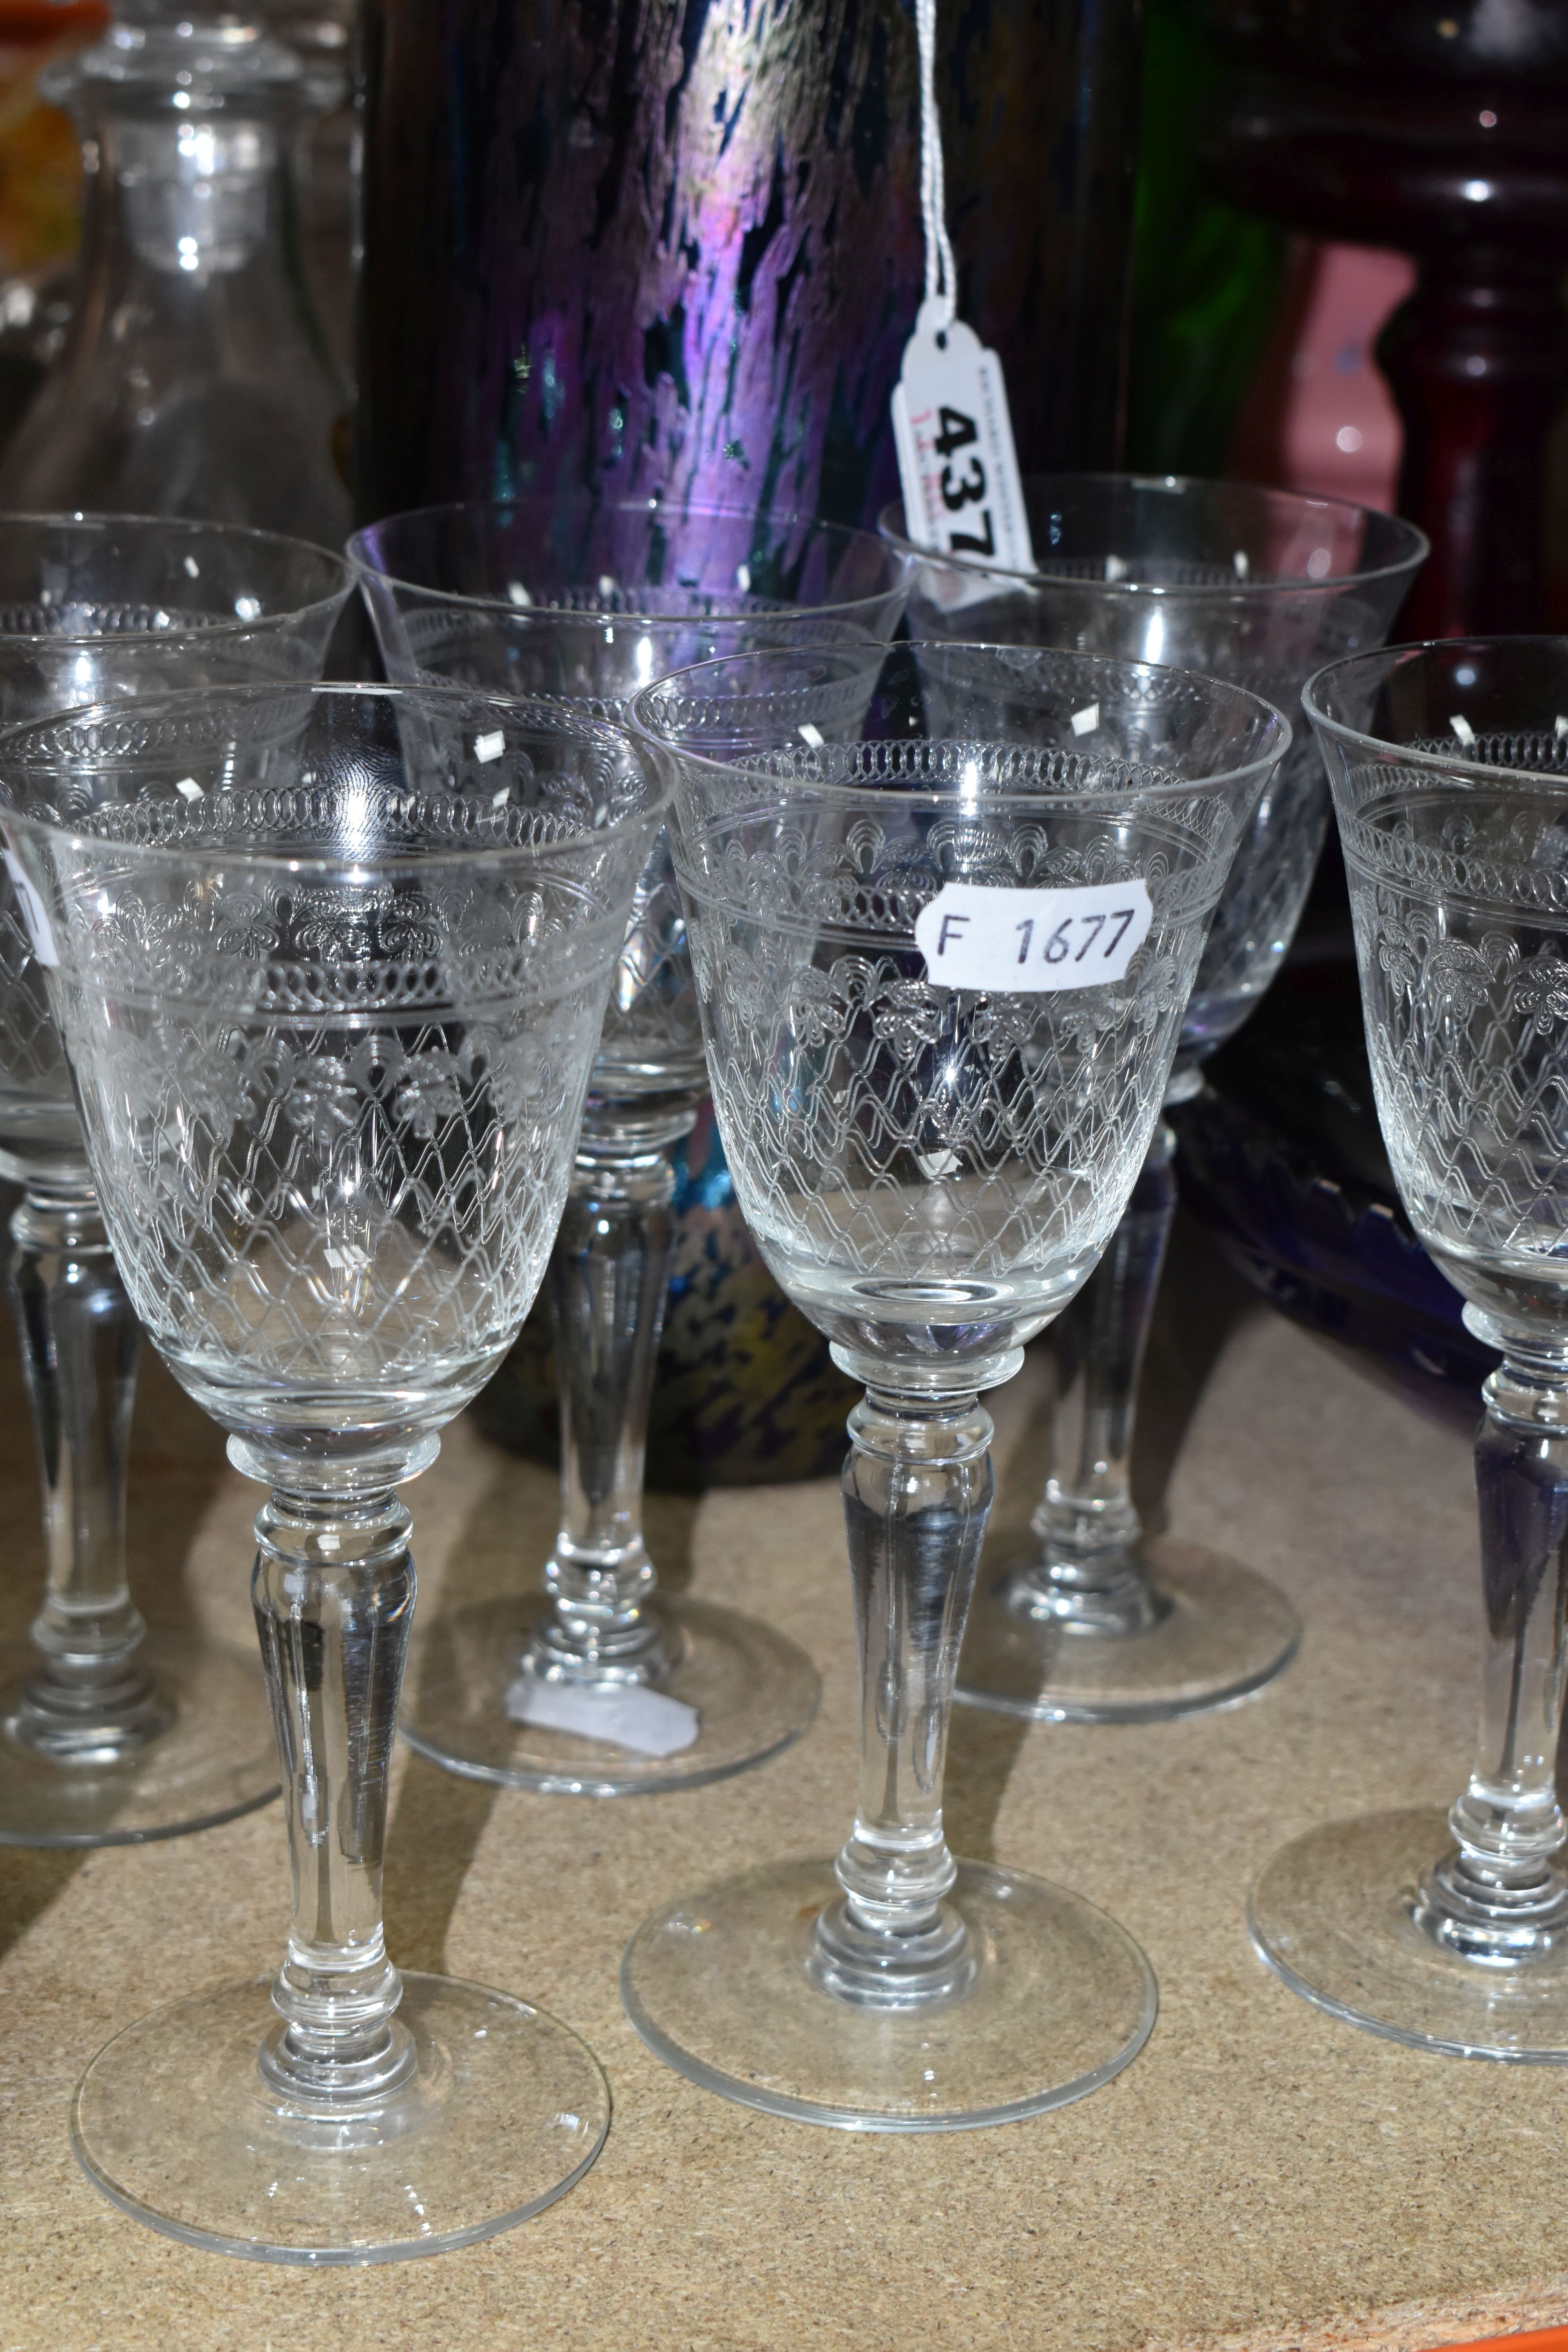 A COLLECTION OF VARIOUS DECORATIVE GLASSWARE including three Murano style art glass objects, six - Image 4 of 6